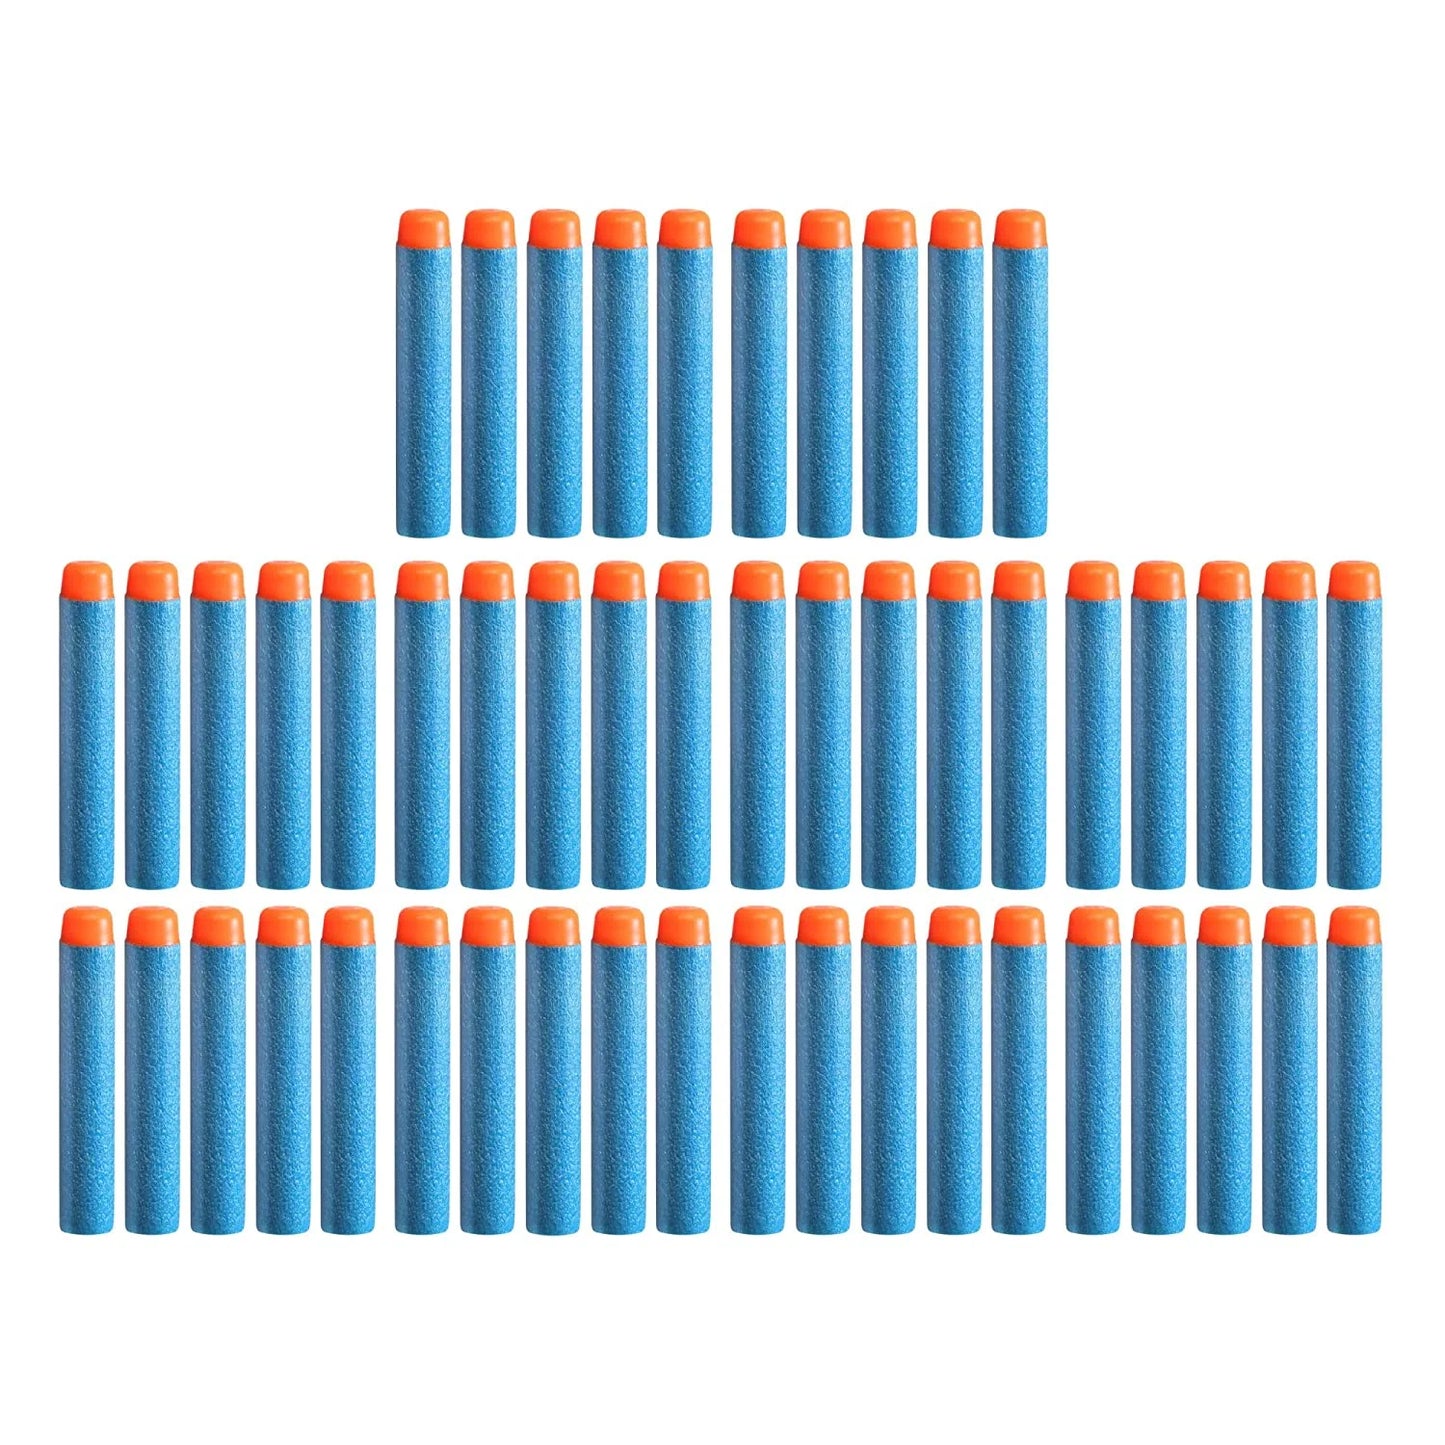 Nerf Elite 2.0 50-Dart Refill Pack, 50 Official Nerf Elite 2.0 Foam Darts,Compatible With All Nerf Blasters That Use Elite Darts